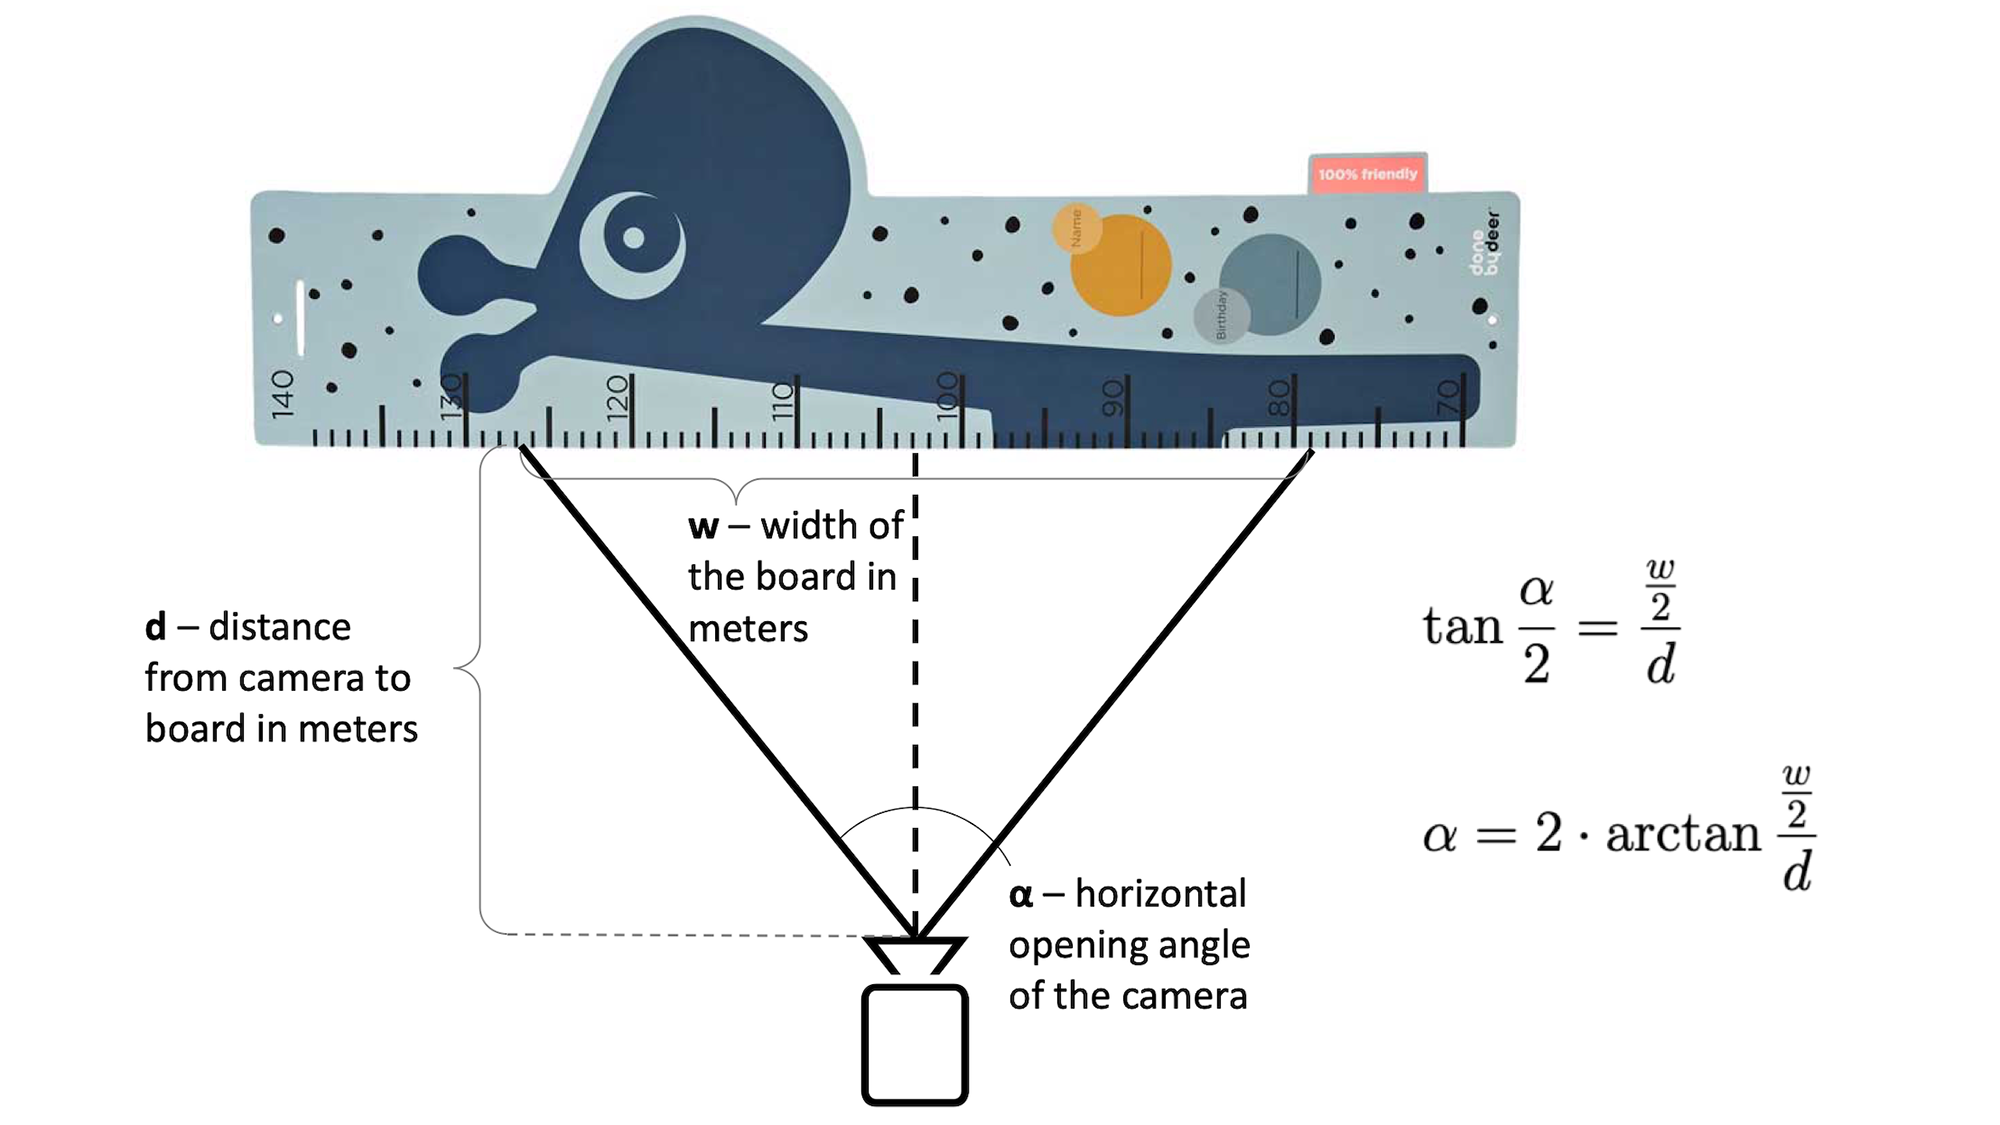 How to (approximately) calculate the horizontal opening angle of a camera